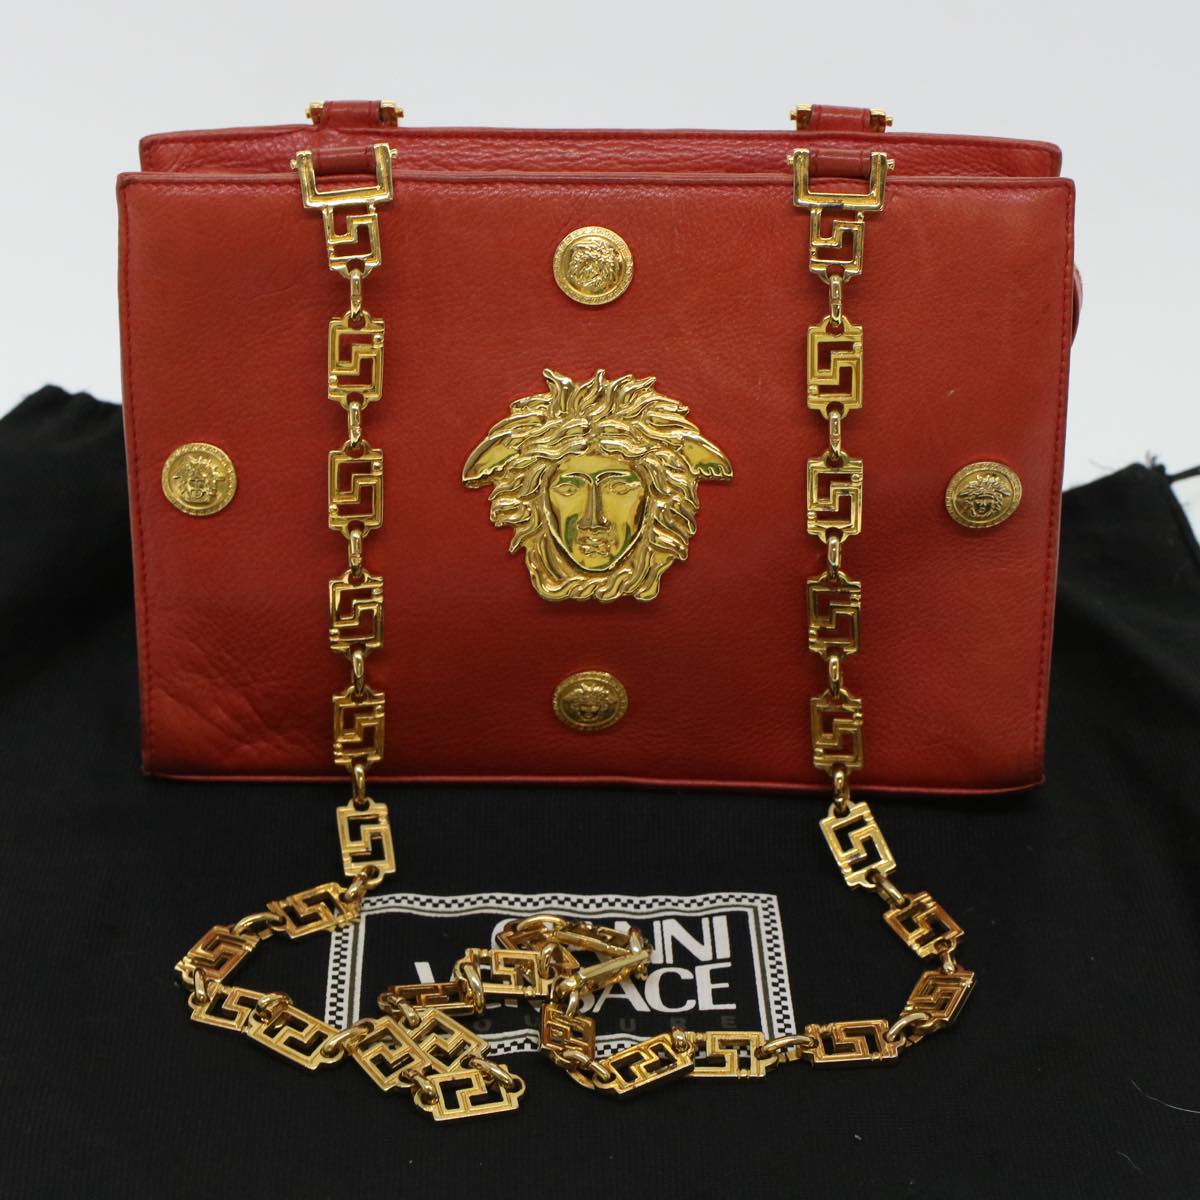 VERSACE Chain Shoulder Bag Leather Red Auth 42450